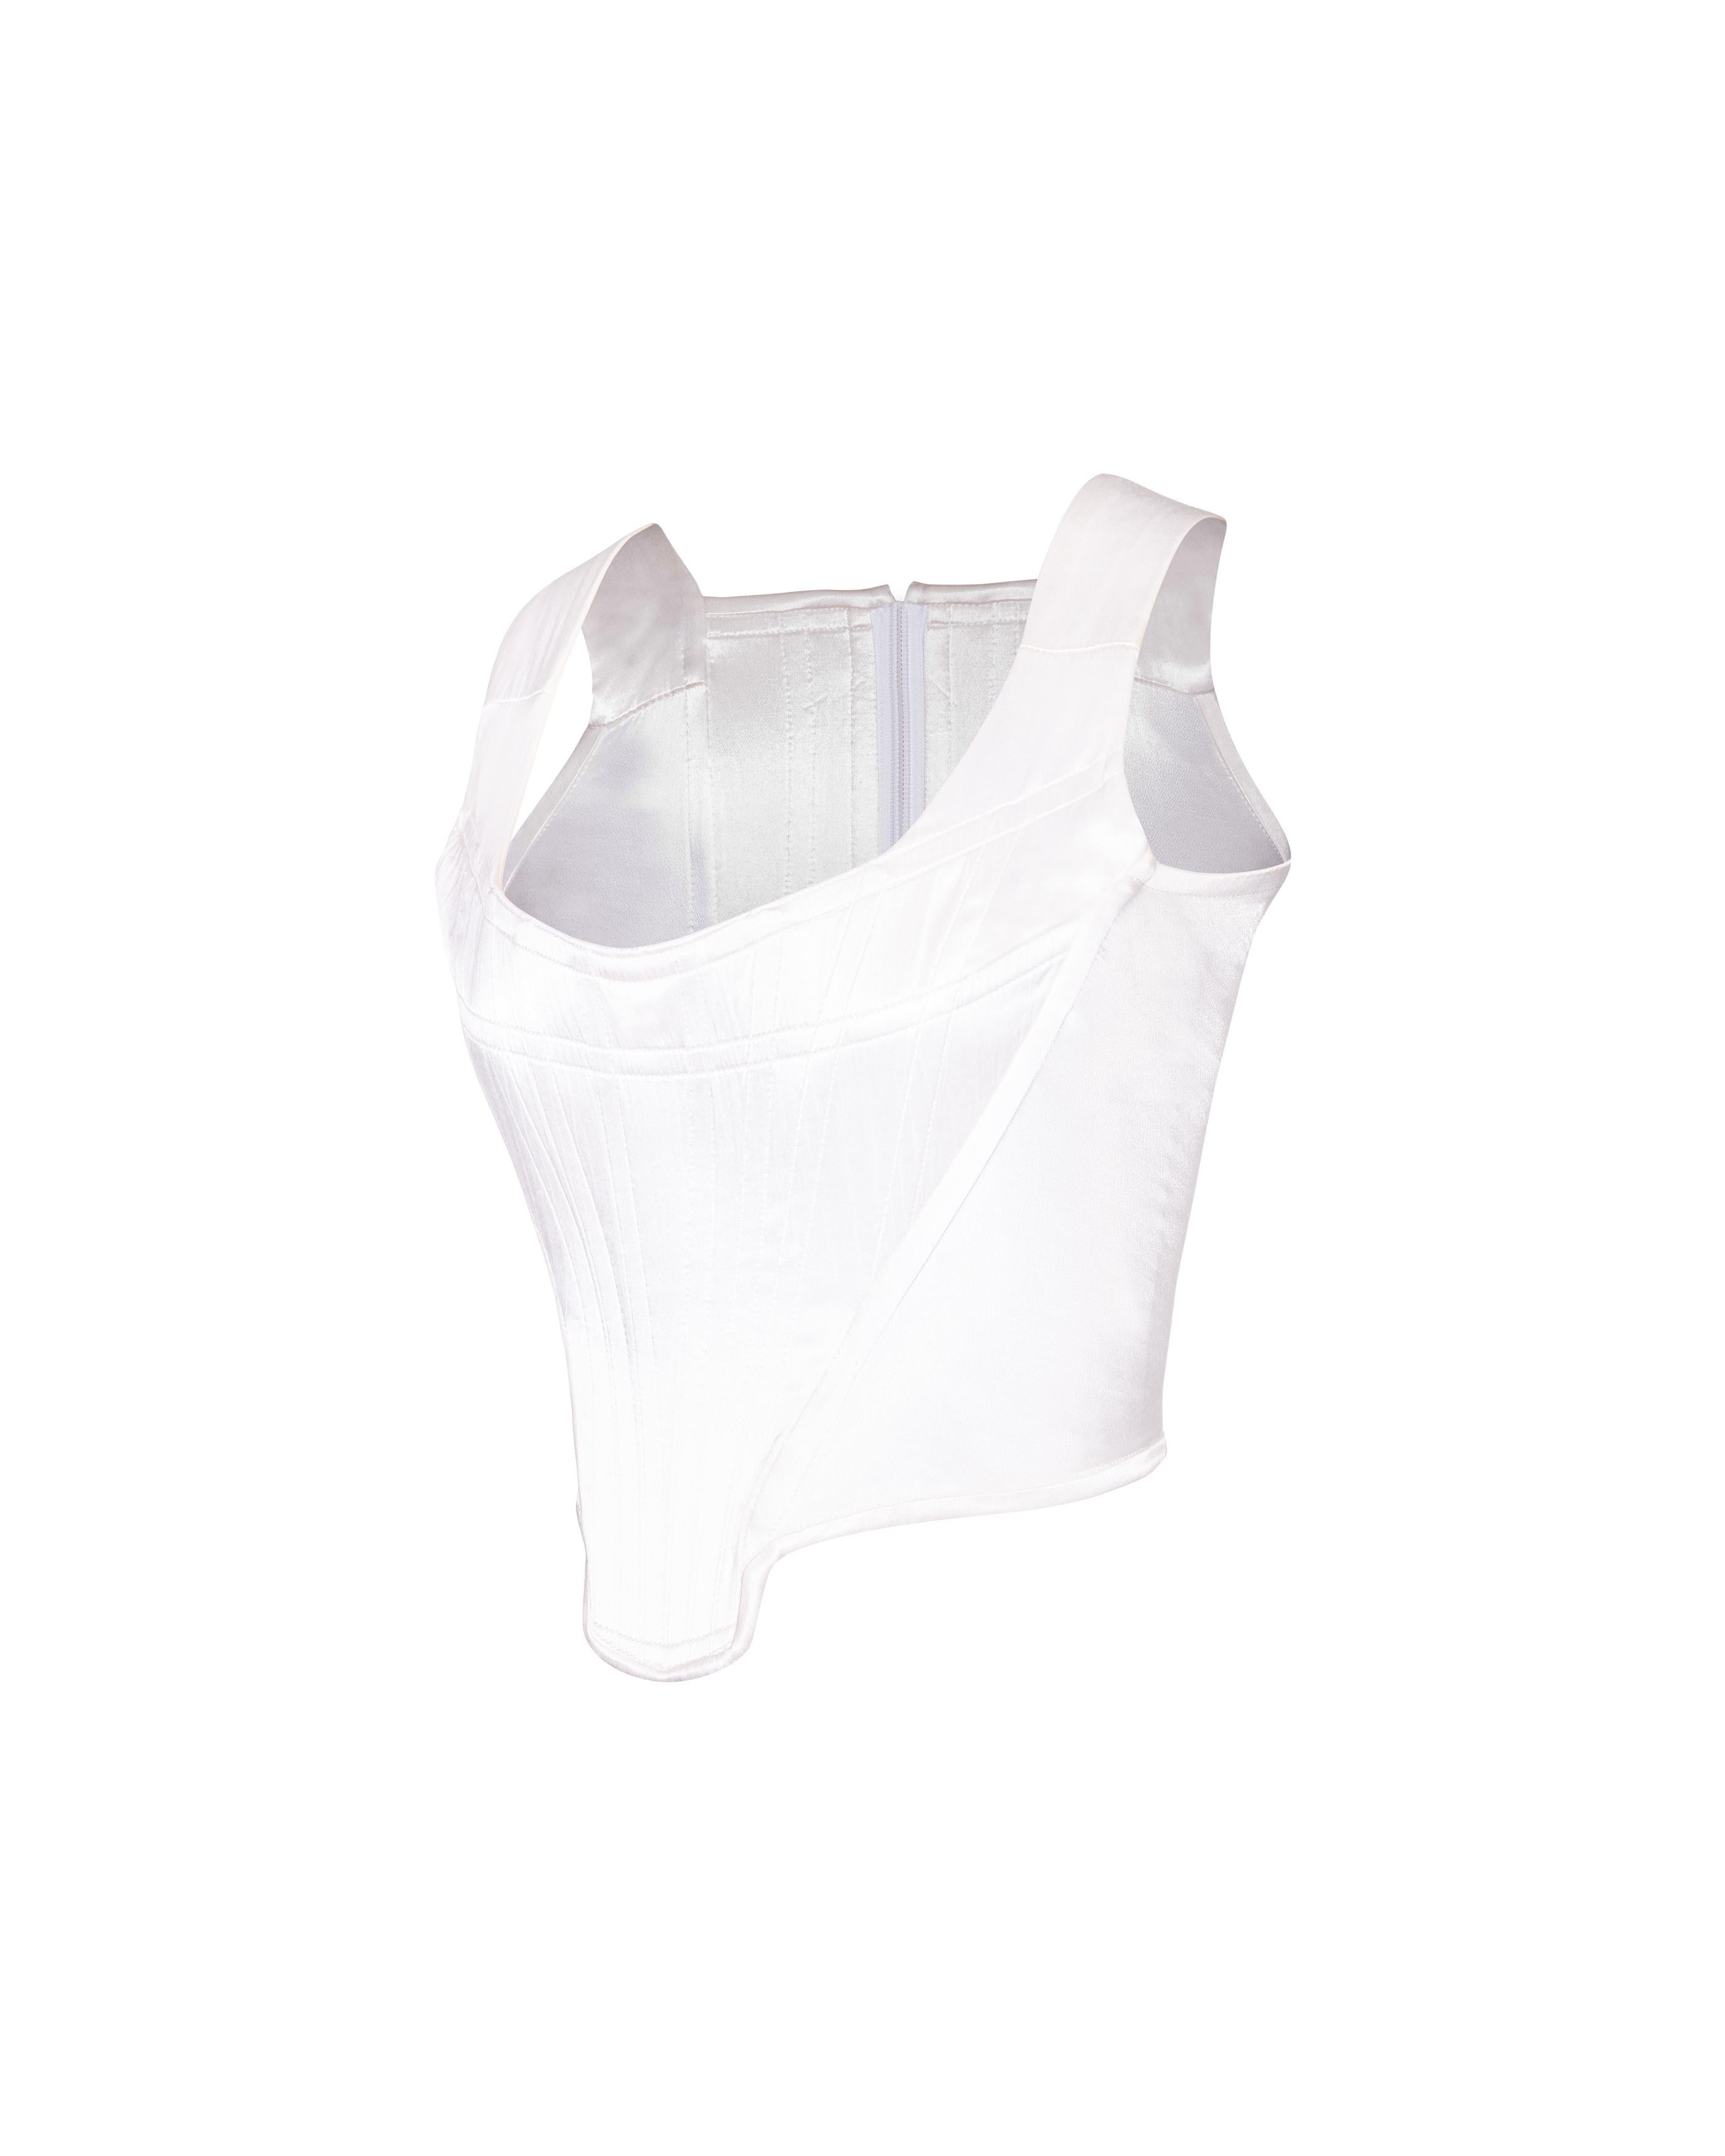 S/S 1991 Vivienne Westwood white satin corset. Boned cotton corset with moderate stretch throughout sides and slight satin finish. Center back zip closure. In very good vintage condition with light wear throughout, including slight pilling